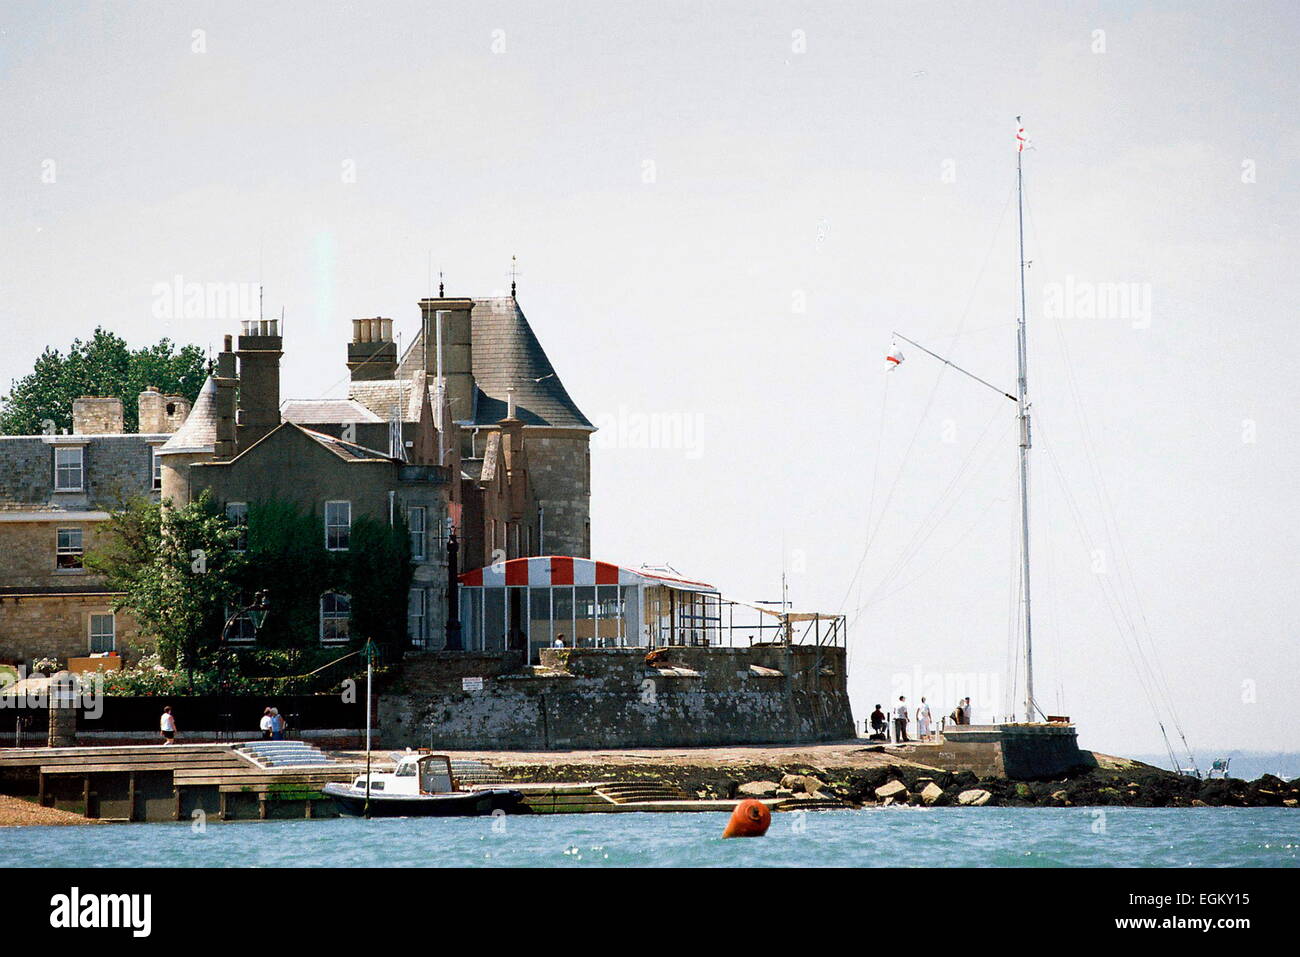 AJAXNETPHOTO - COWES, Isola di Wight in Inghilterra. - YACHTING MECCA - il Royal Yacht Squadron. Foto:JONATHAN EASTLAND/AJAX REF:553602_8 Foto Stock